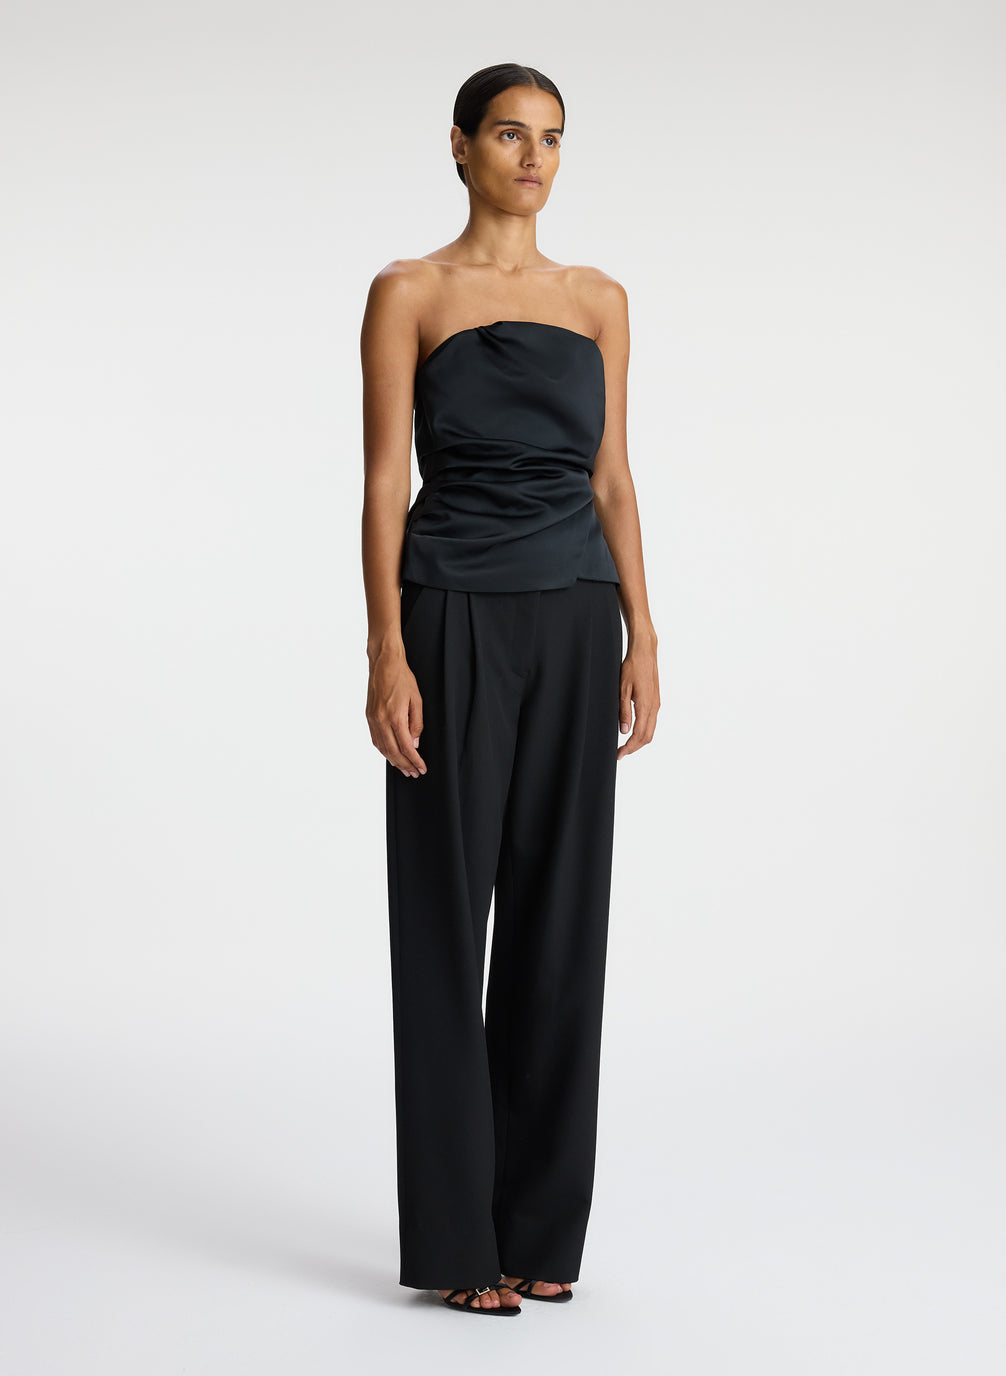 side  view of woman wearing black strapless satin top and black pants